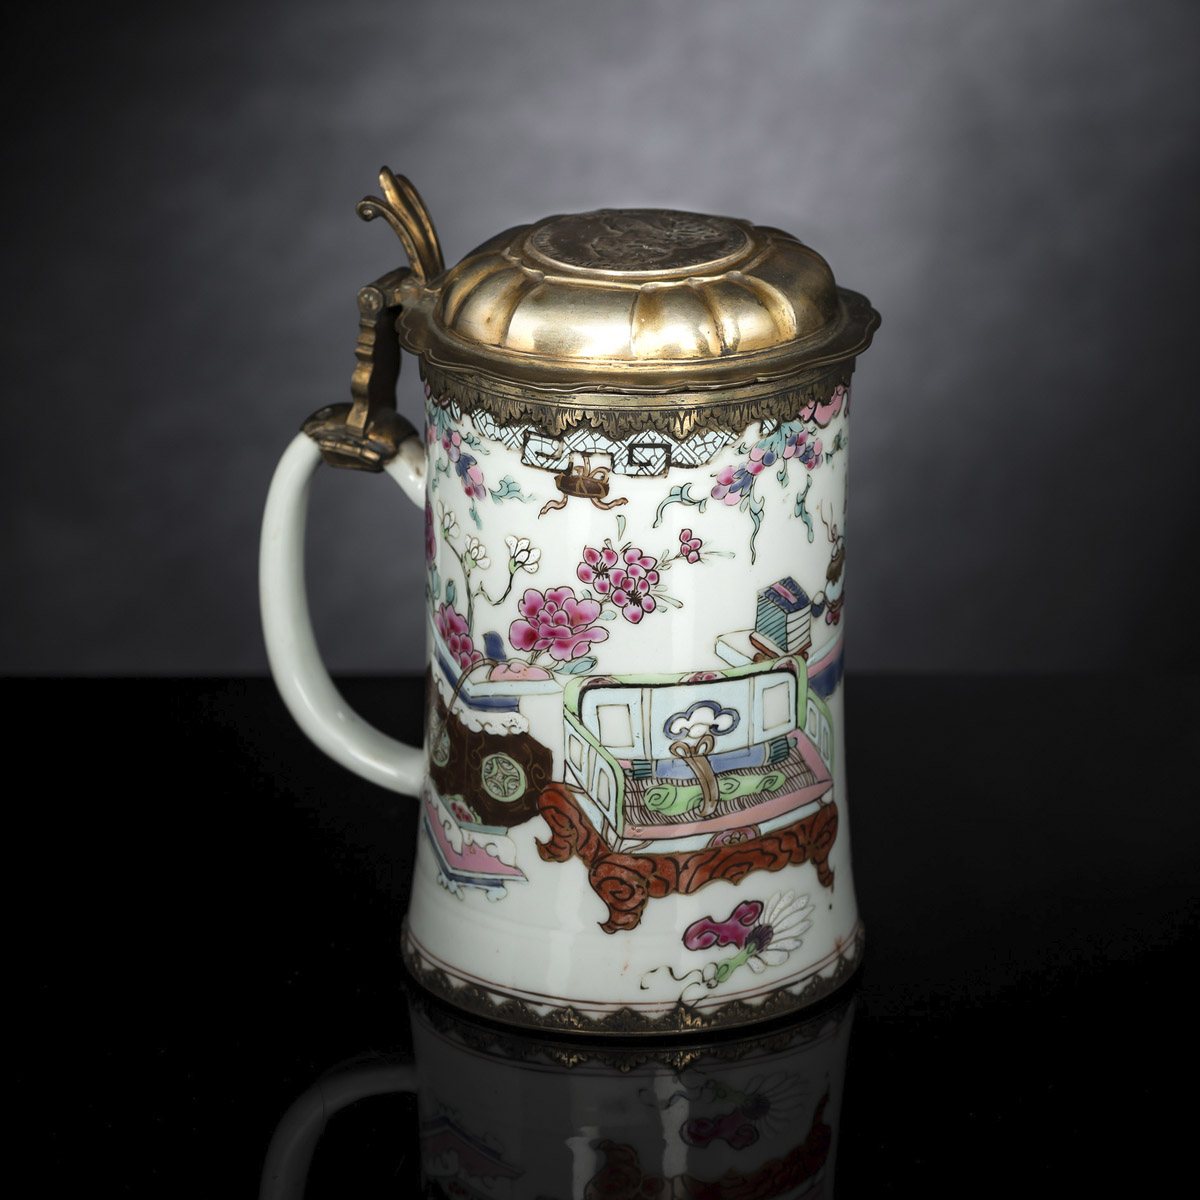 A GOOD FAMILLE ROSE JUG WITH A GERMAN ORMOLU MOUNTING WITH AUGUSTUS REX COIN MOUNTED IN THE COVER